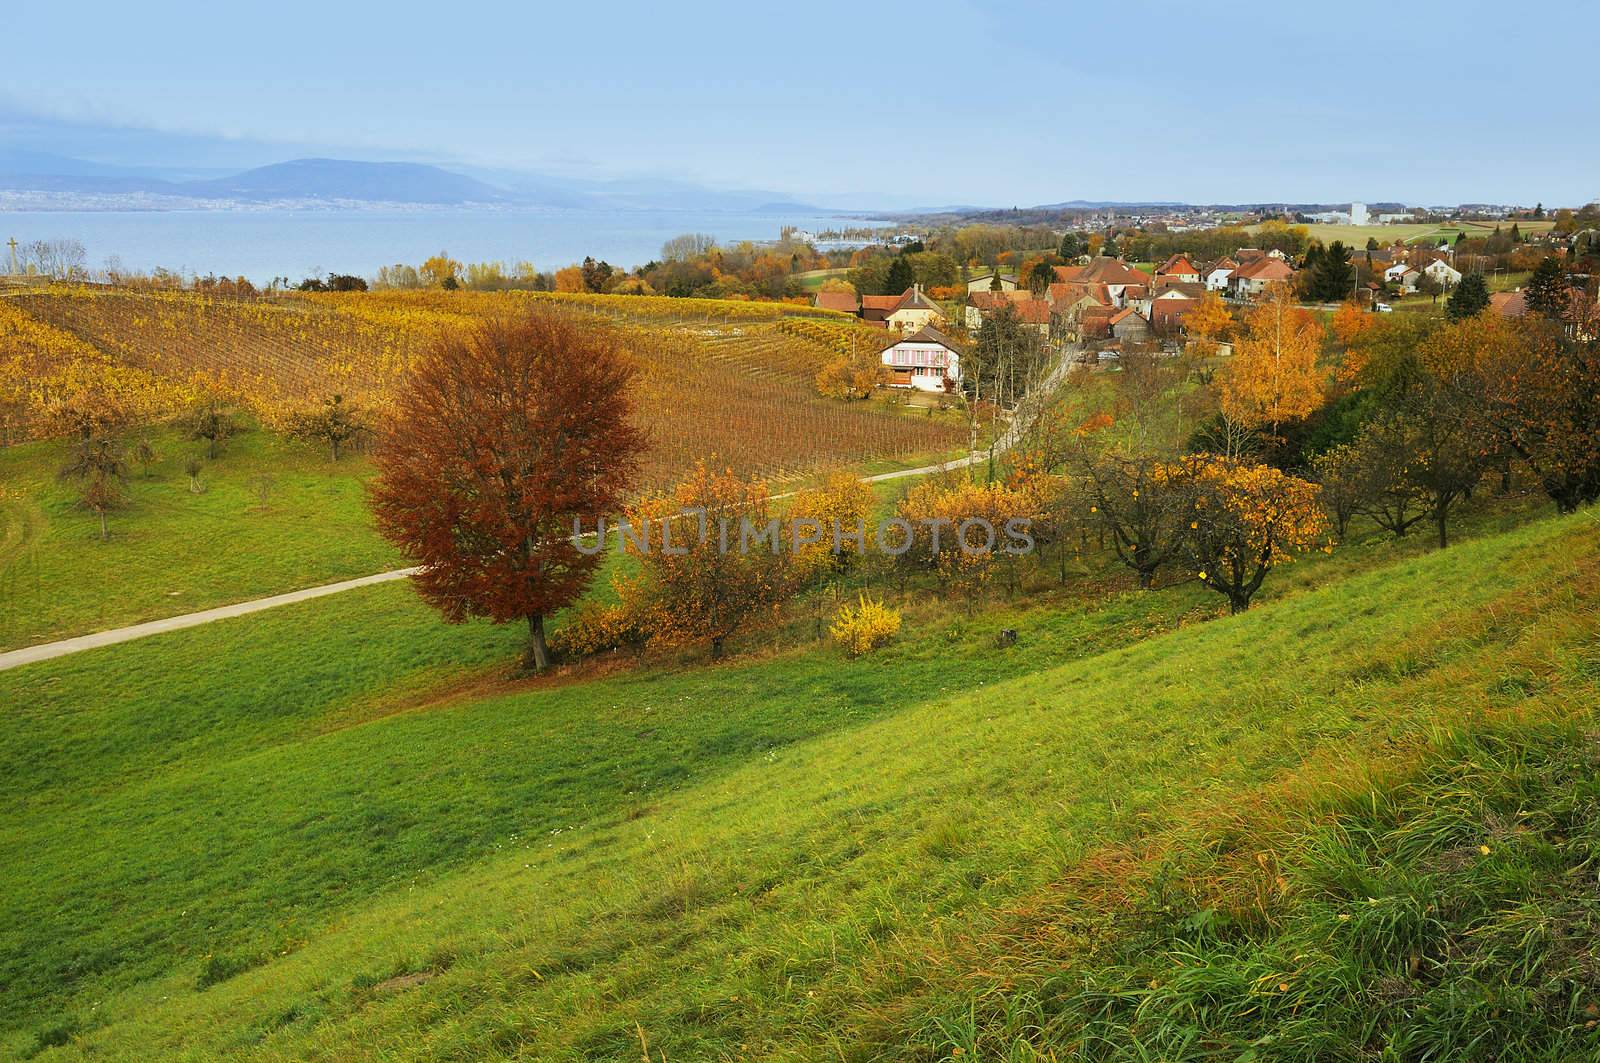 Lake Neuchatel and countryside by ventdusud